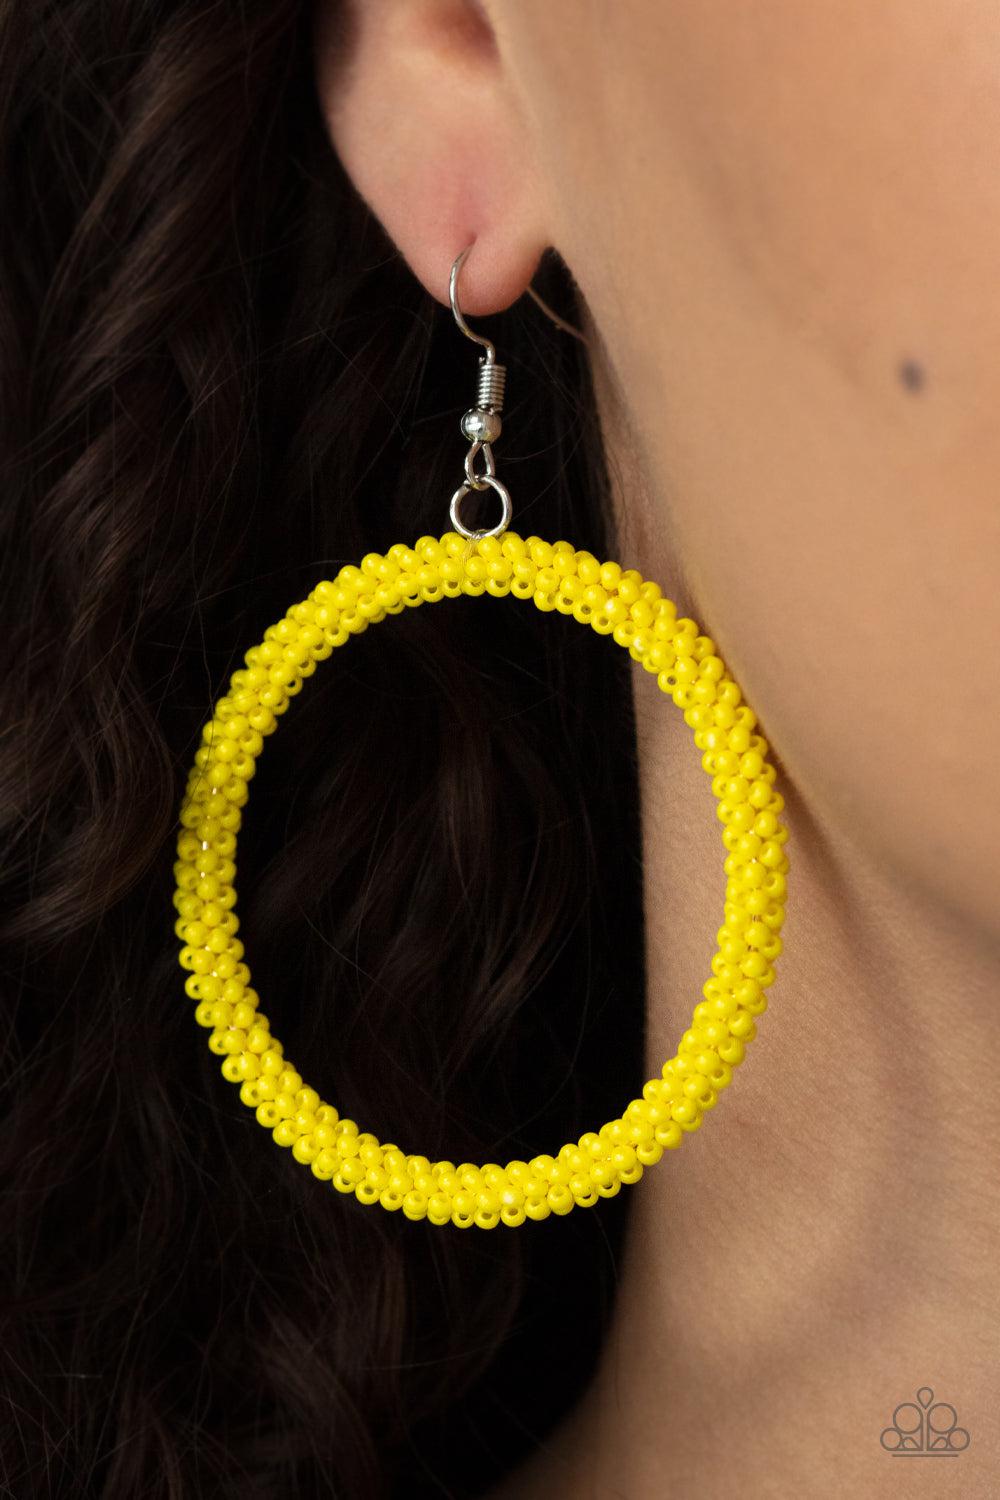 Beauty and the BEACH Yellow Seed Bead Earrings - Paparazzi Accessories-on model - CarasShop.com - $5 Jewelry by Cara Jewels